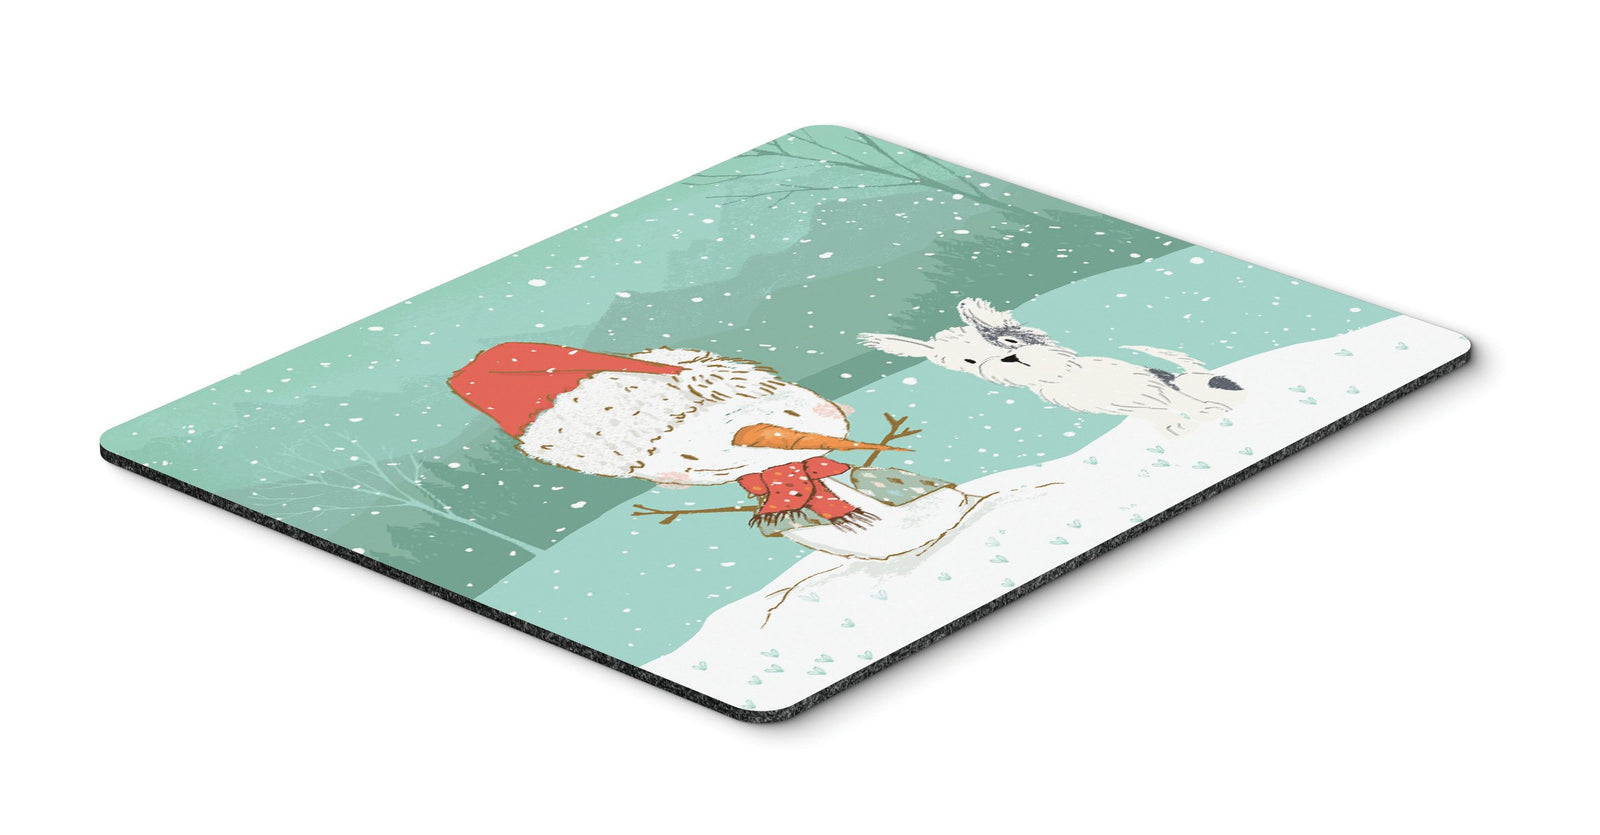 Black and White Terrier Snowman Christmas Mouse Pad, Hot Pad or Trivet CK2095MP by Caroline's Treasures